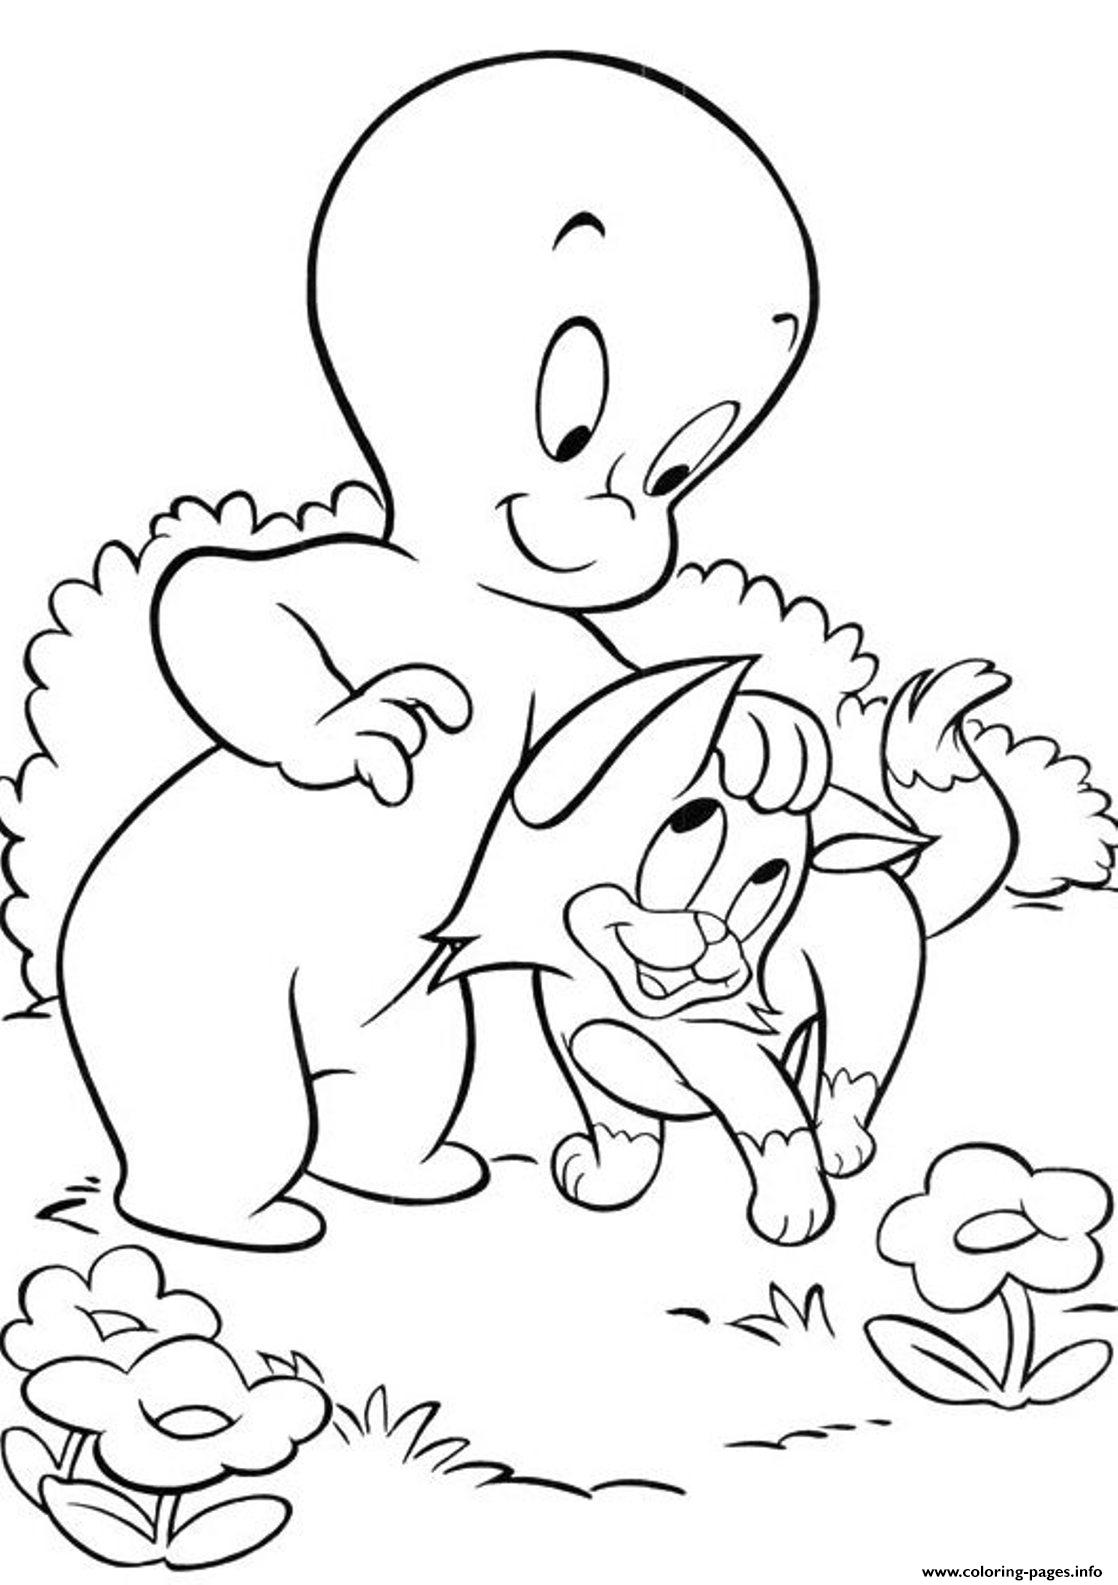 Kitte And Casper Ghost S For Kidse468 coloring